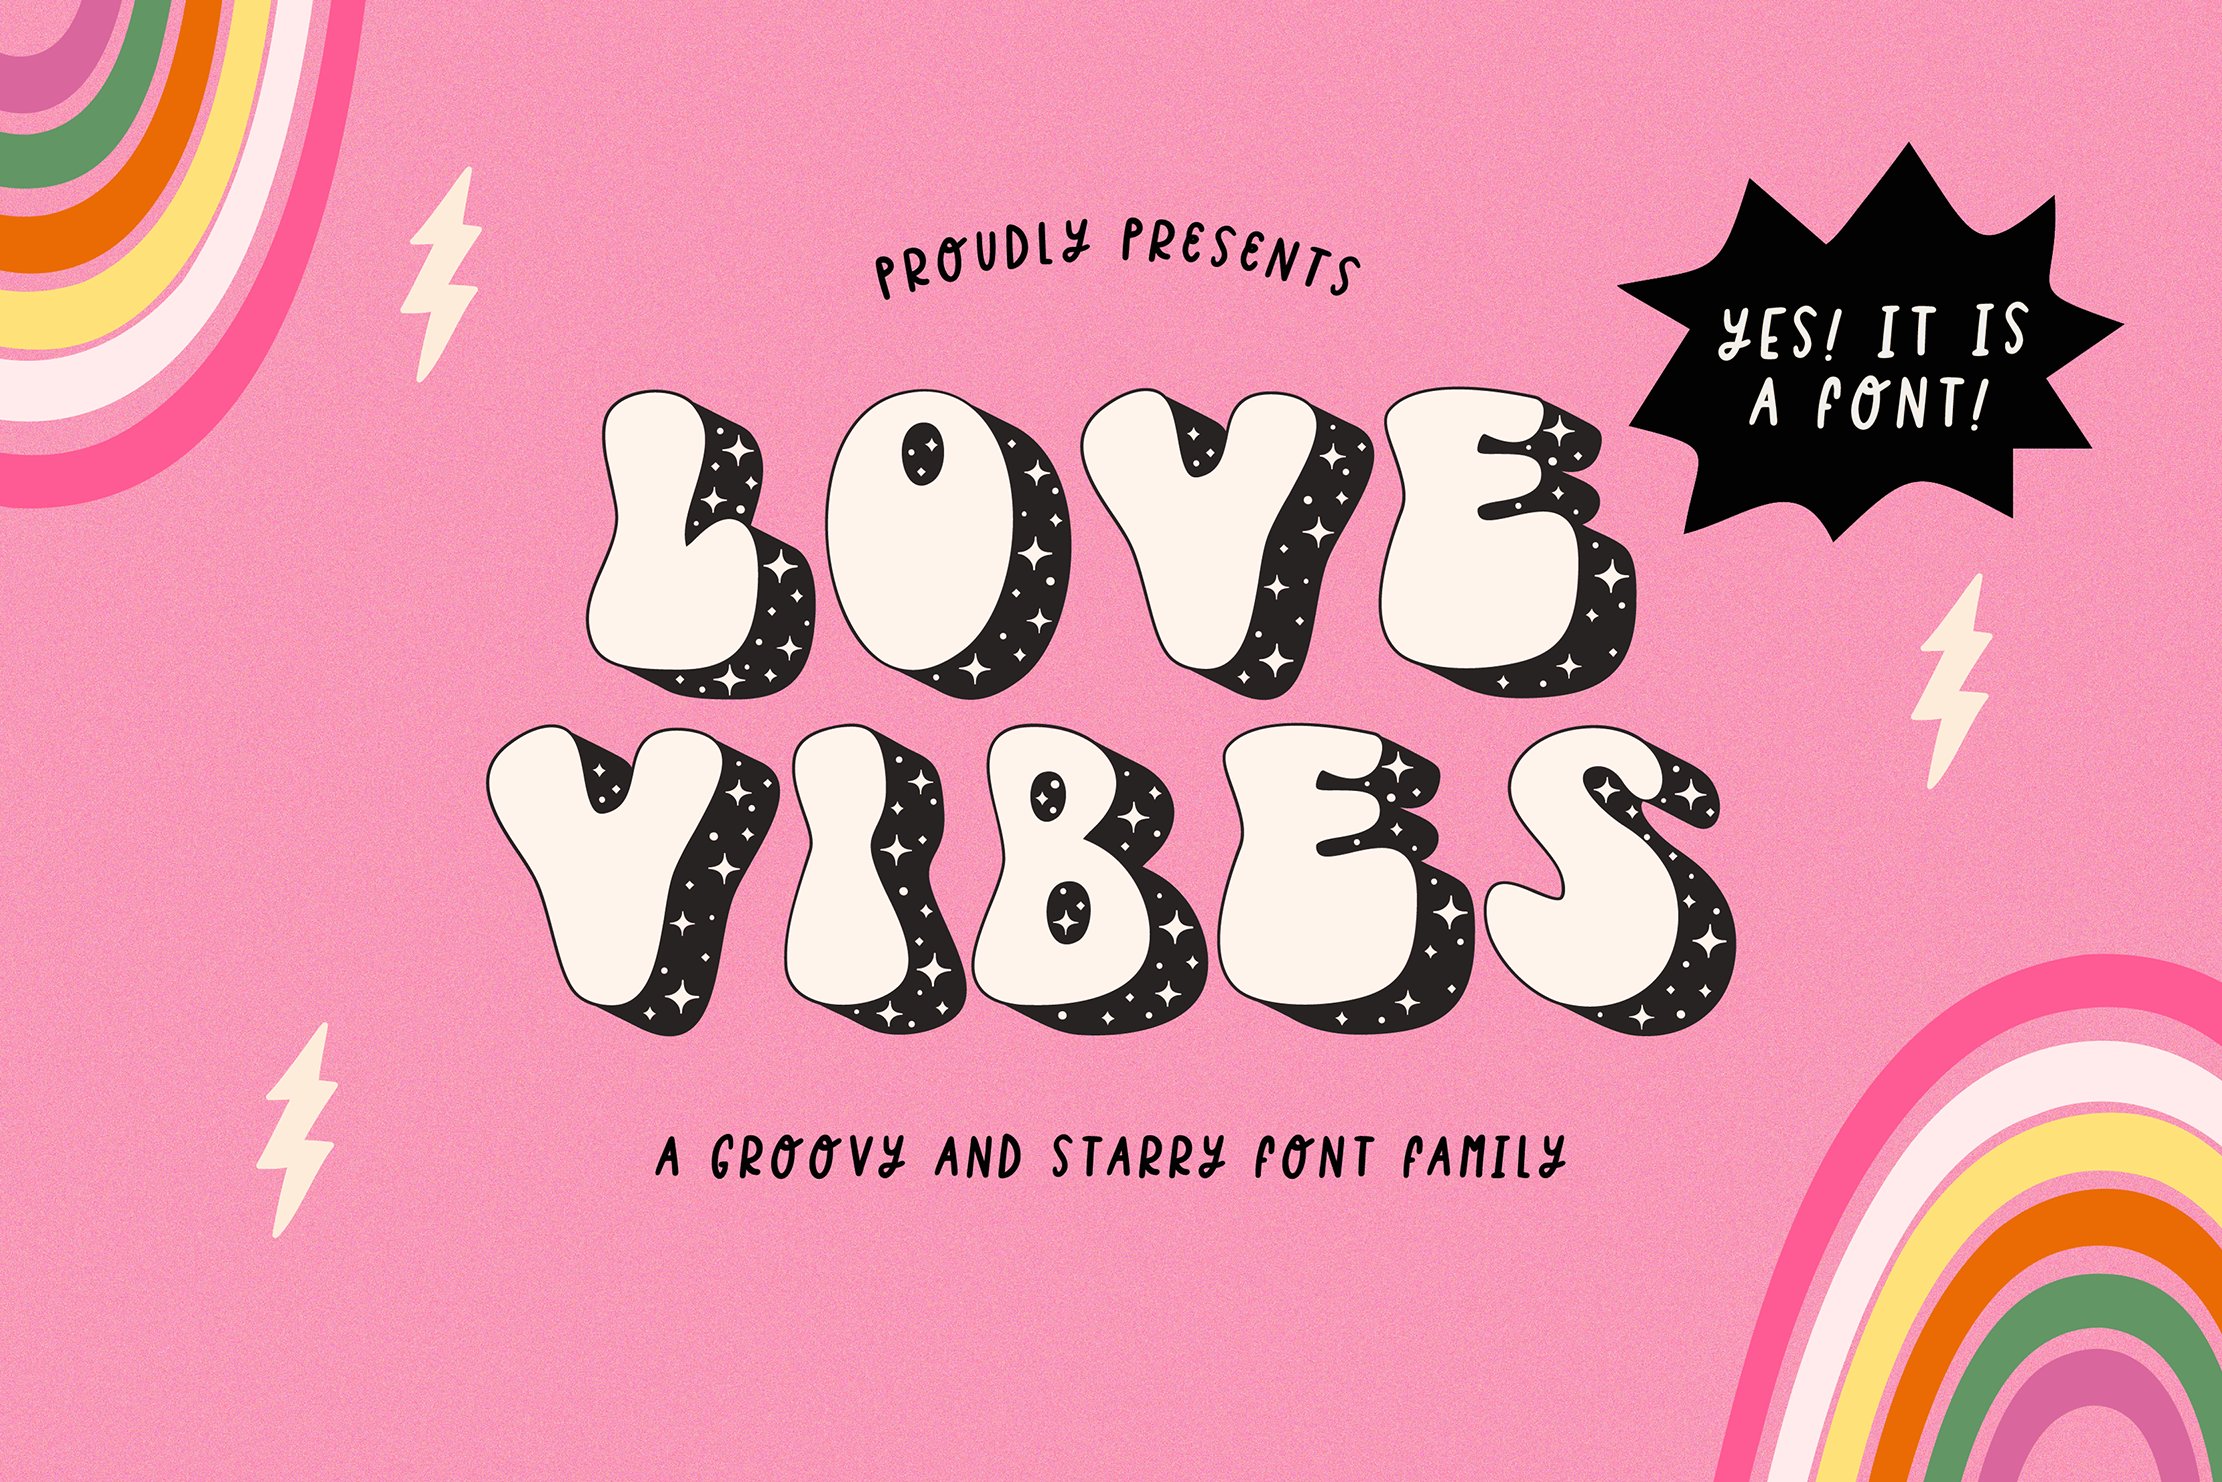 LOVE VIBES cover image.